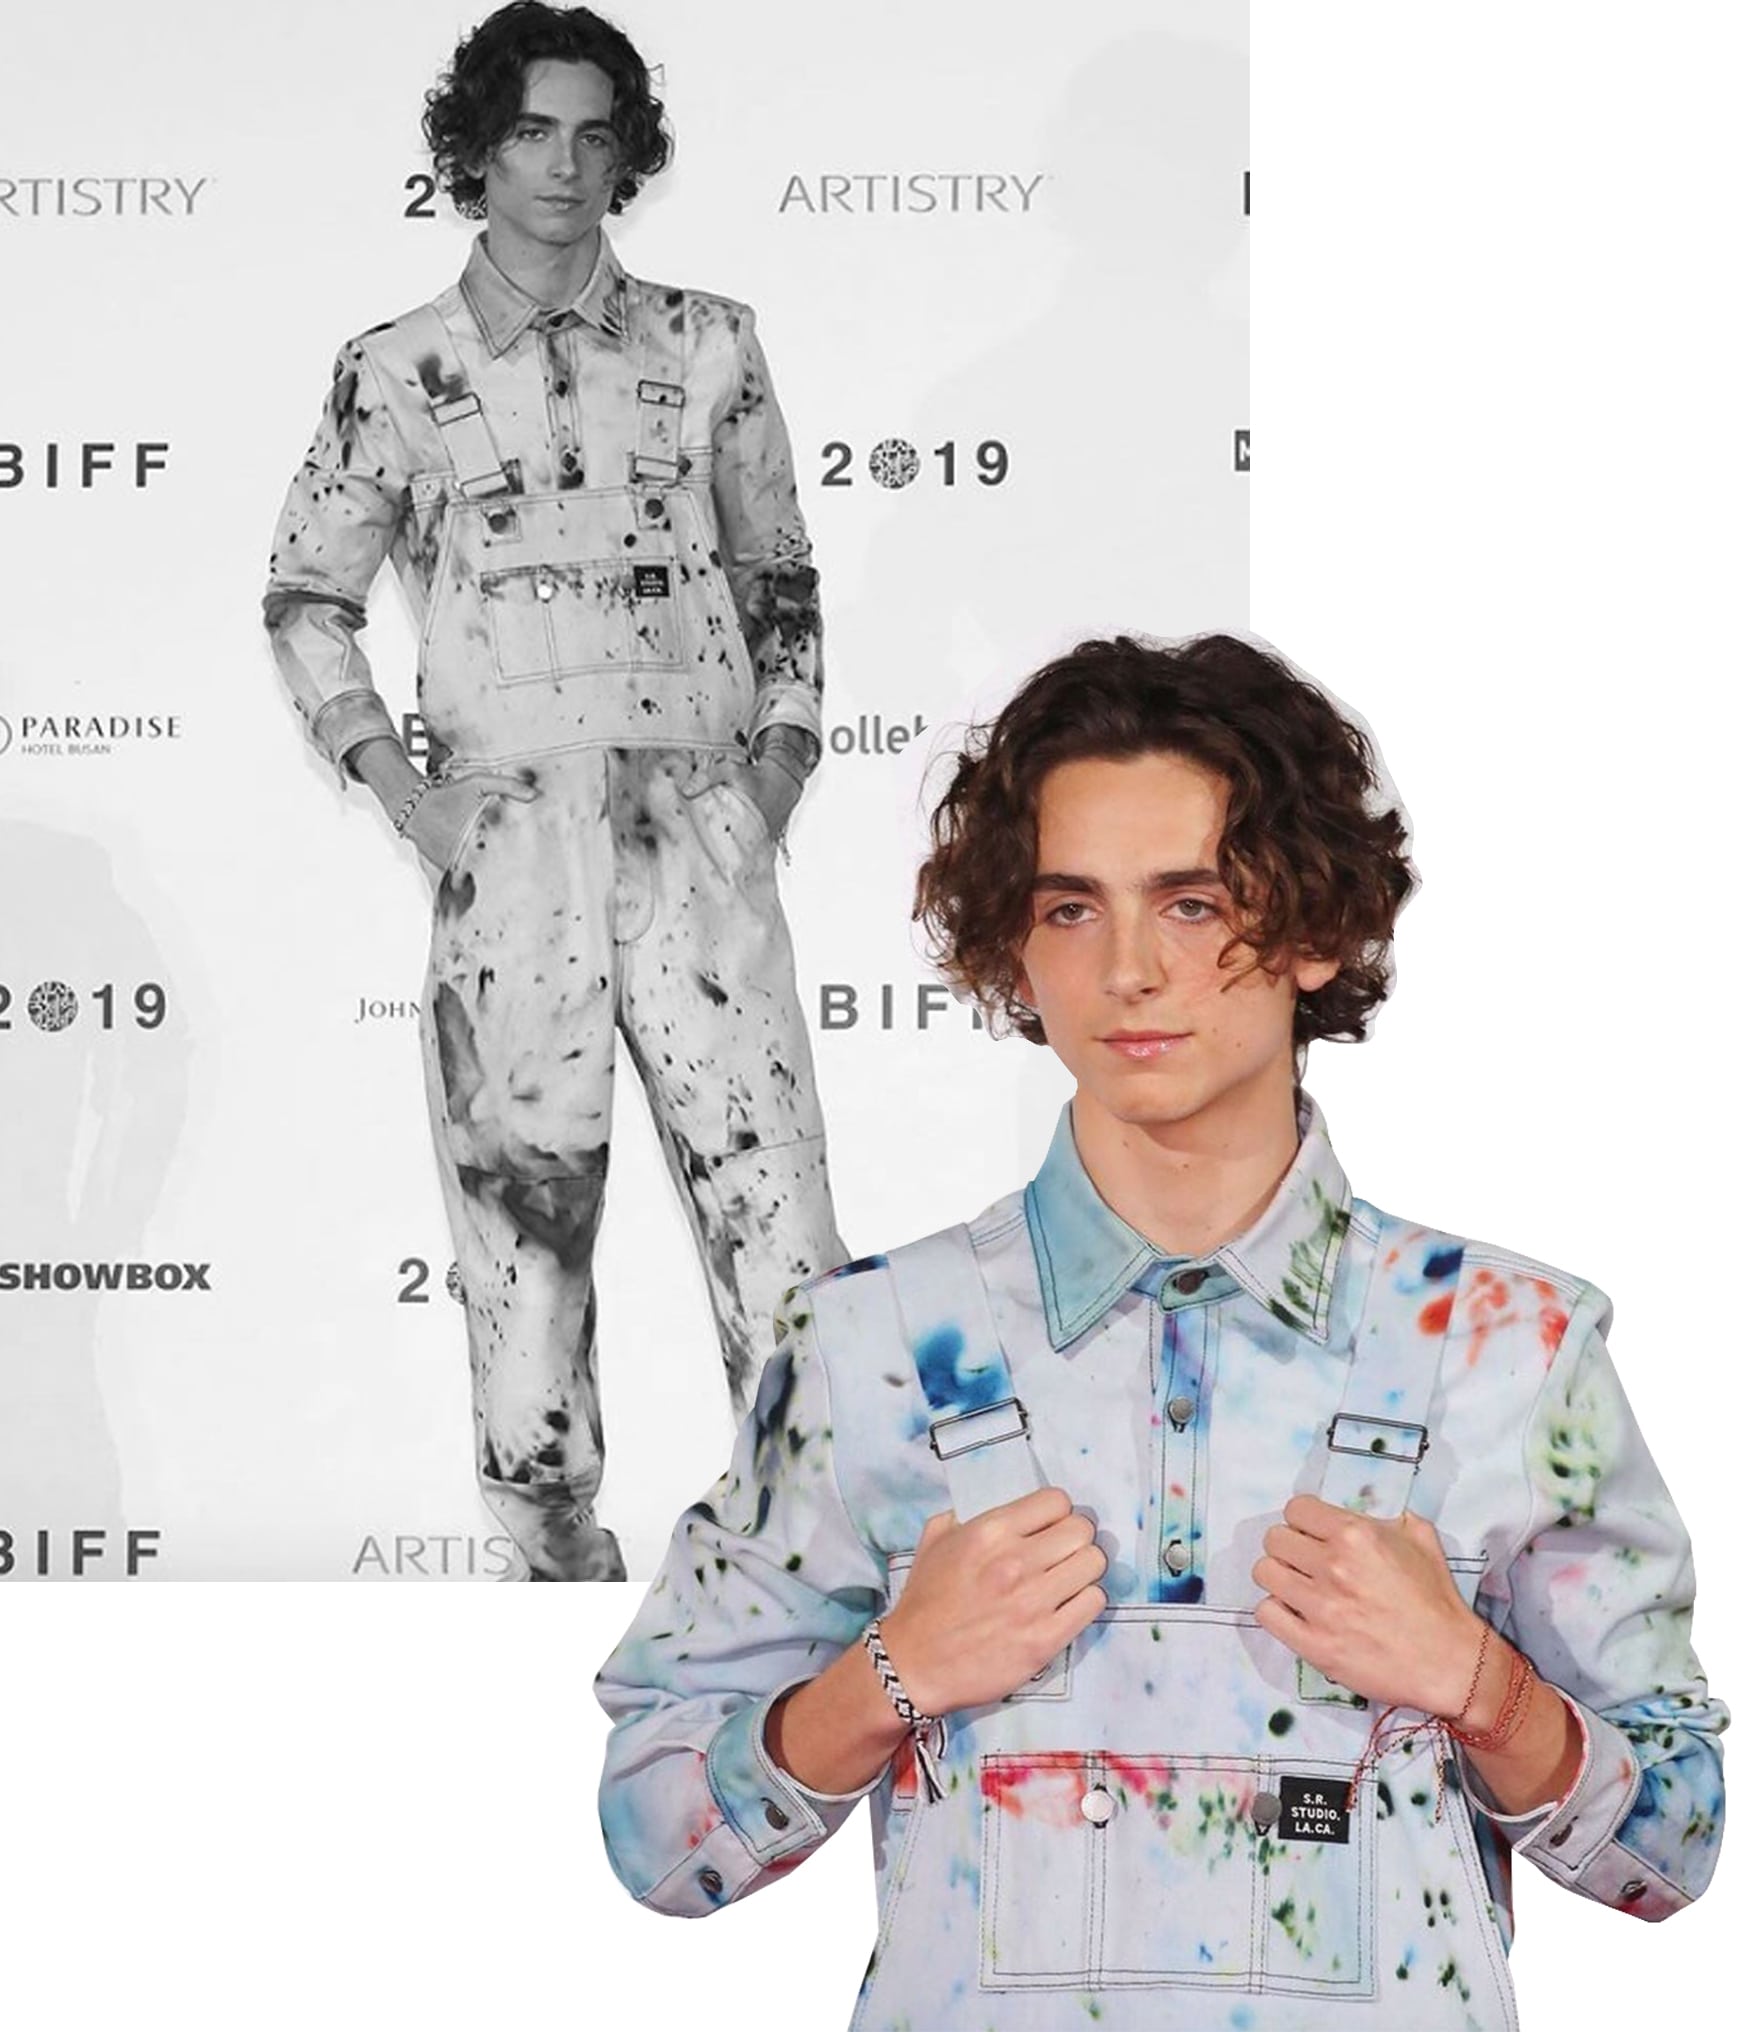 Timothée Chalamet's Red Carpet Signature Is Quickly Becoming Clear